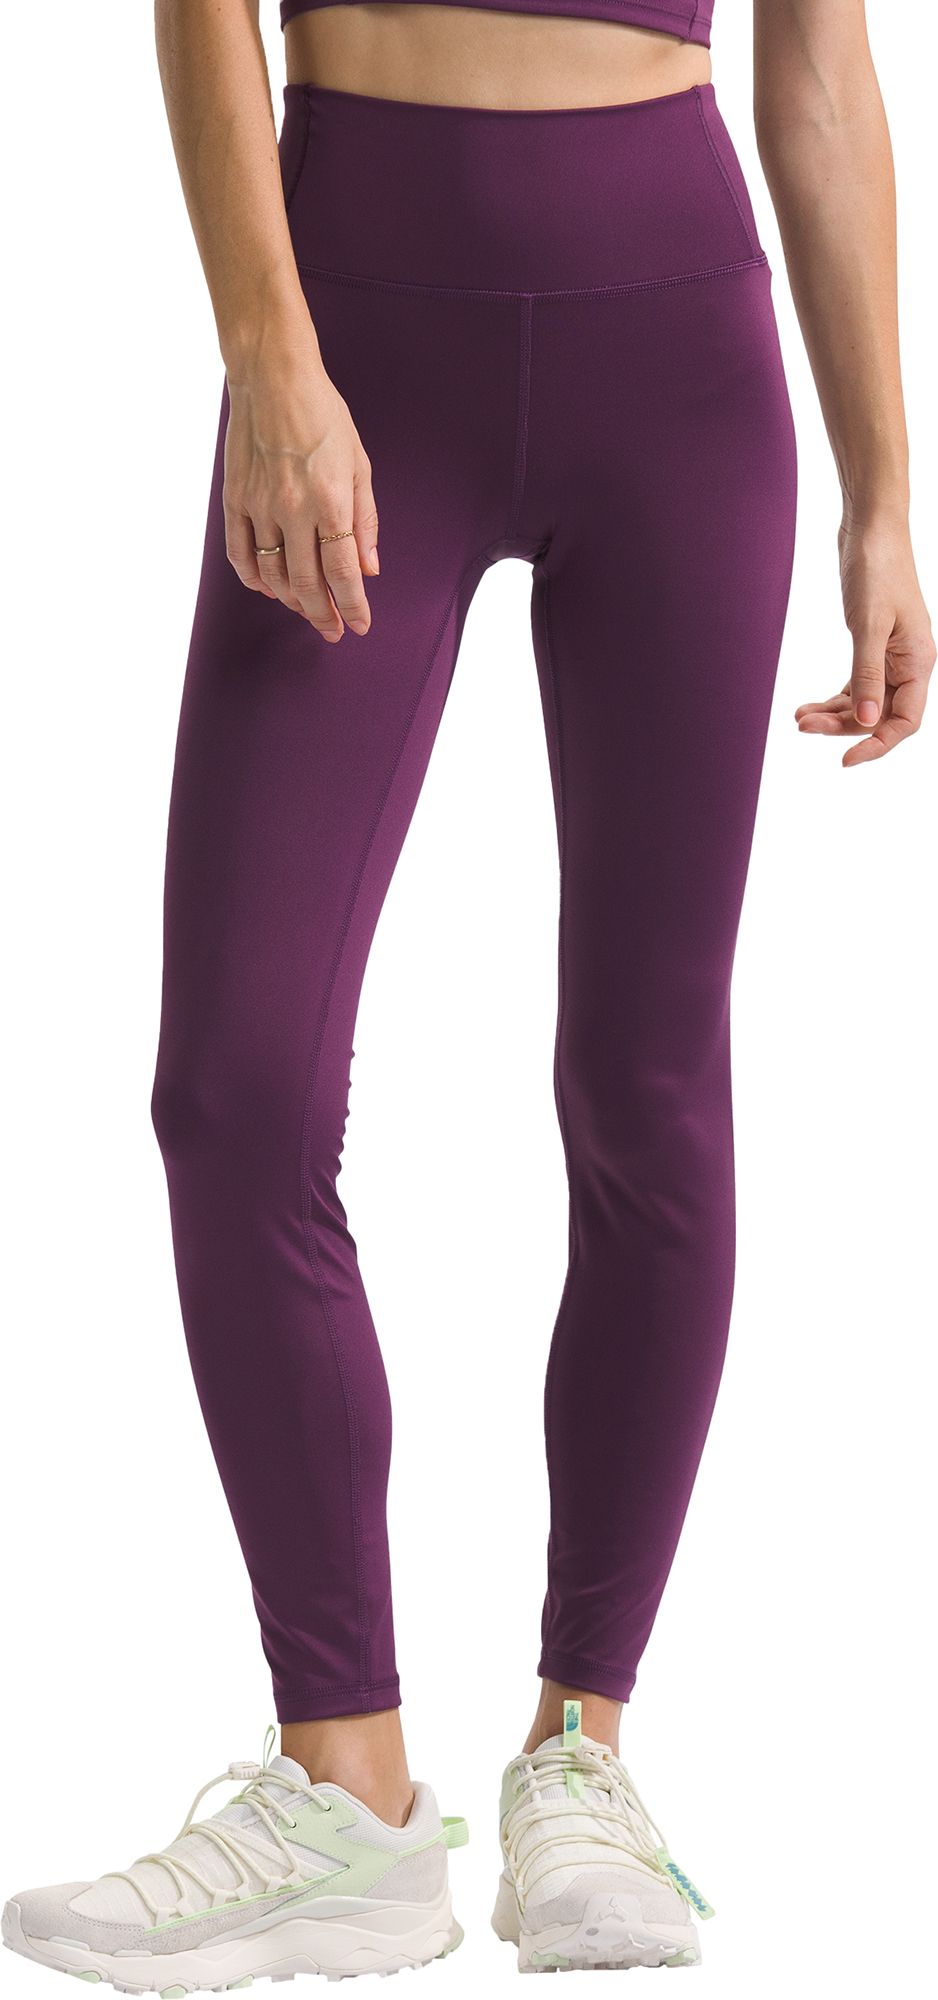 The North Face Women's Dune Sky 7/8 Tights